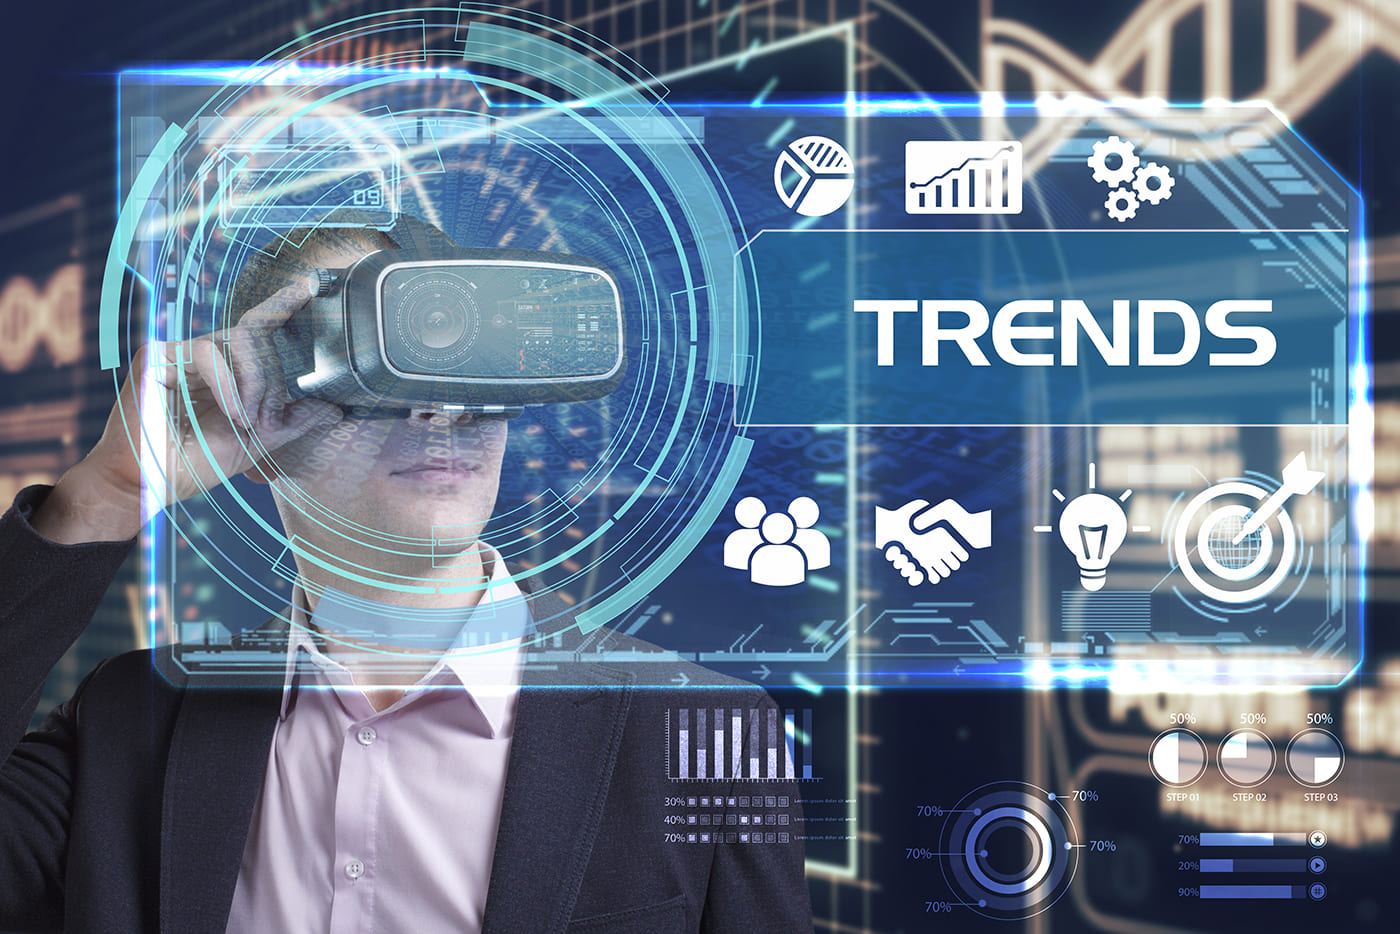 The 5 Biggest Media And Entertainment Technology Trends In 2022 | Bernard Marr